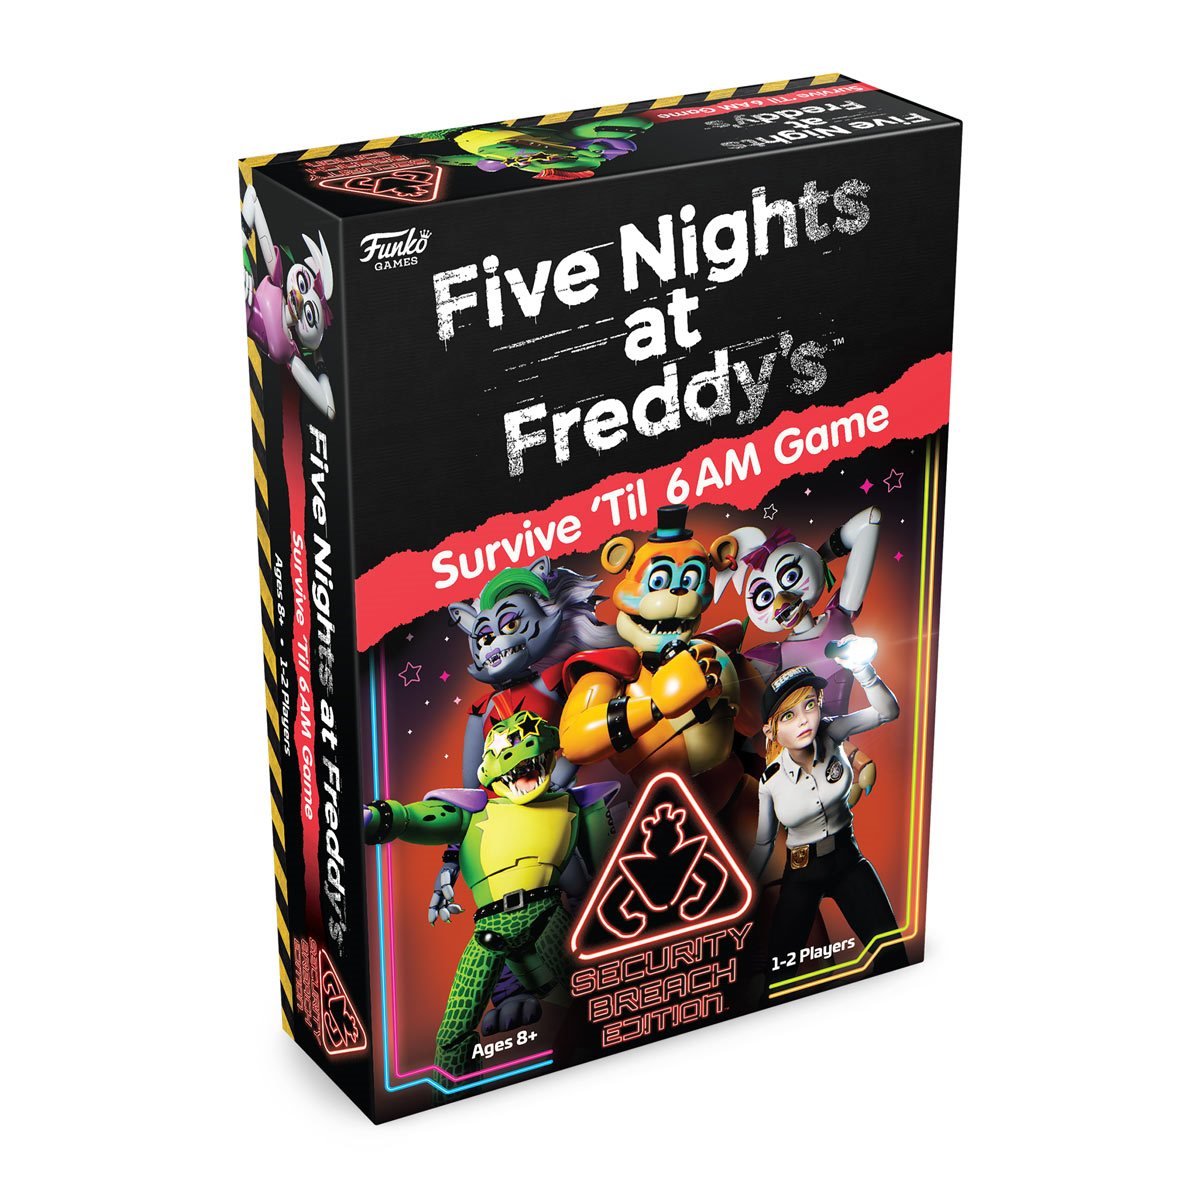 Five Nights at Freddy's: Security Breach and Deathrun TV coming to